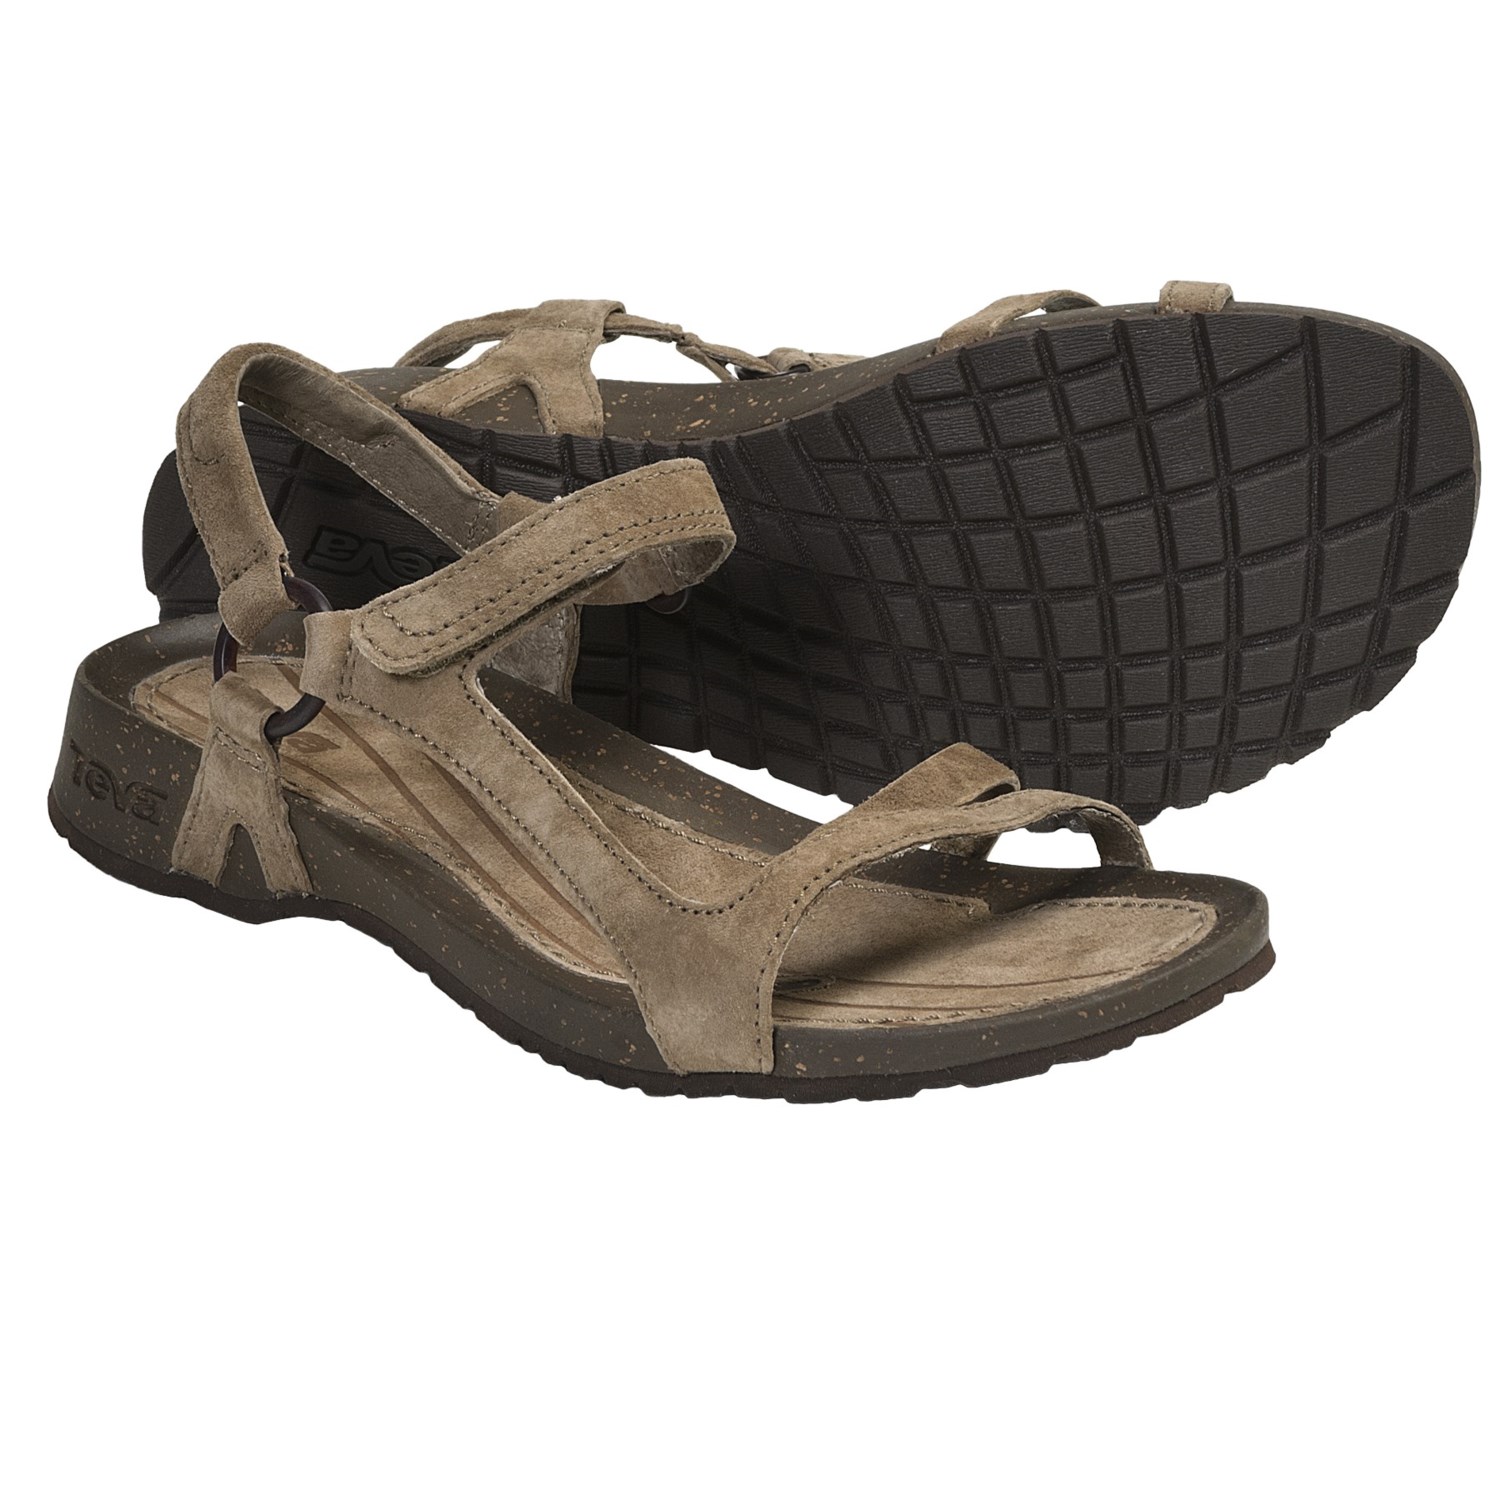 Teva Cabrillo Universal Suede Sandals (For Women) - Save 71%